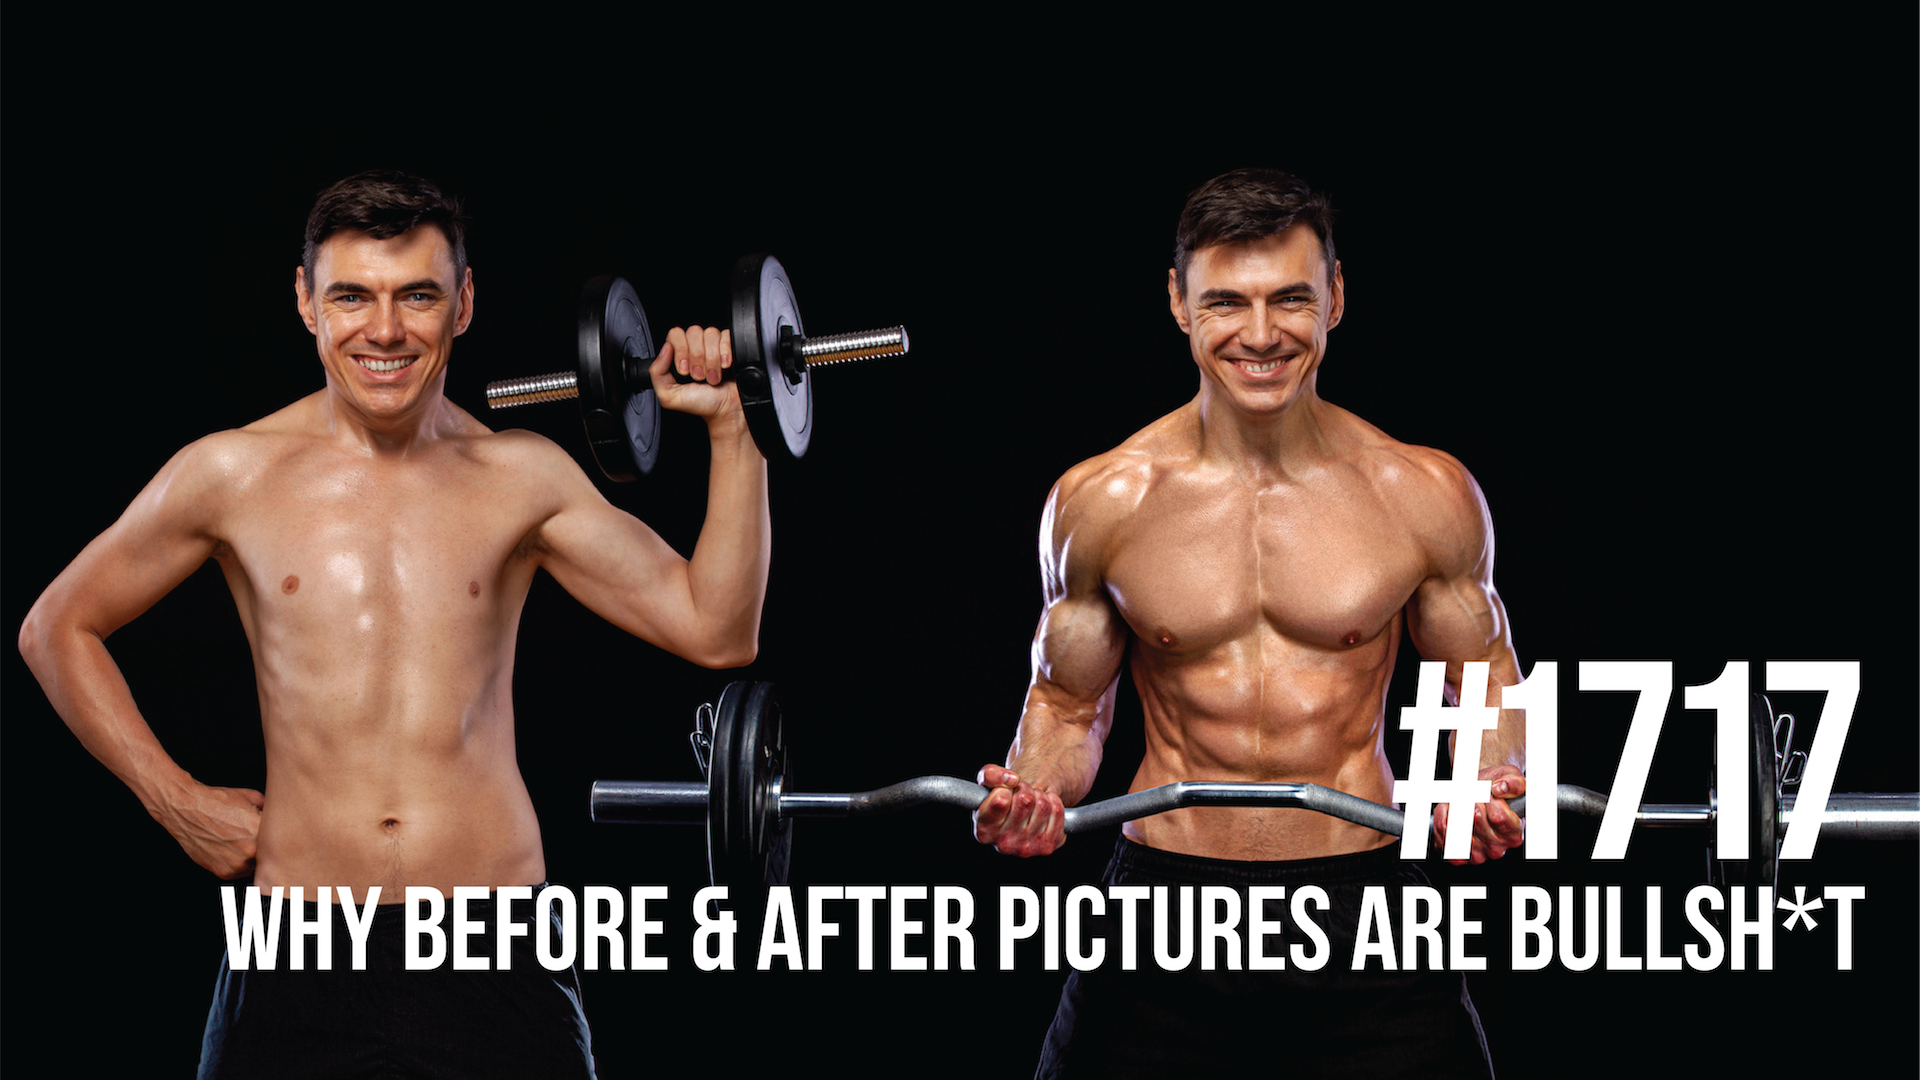 1717: Why Before & After Pictures Are Bullsh*t